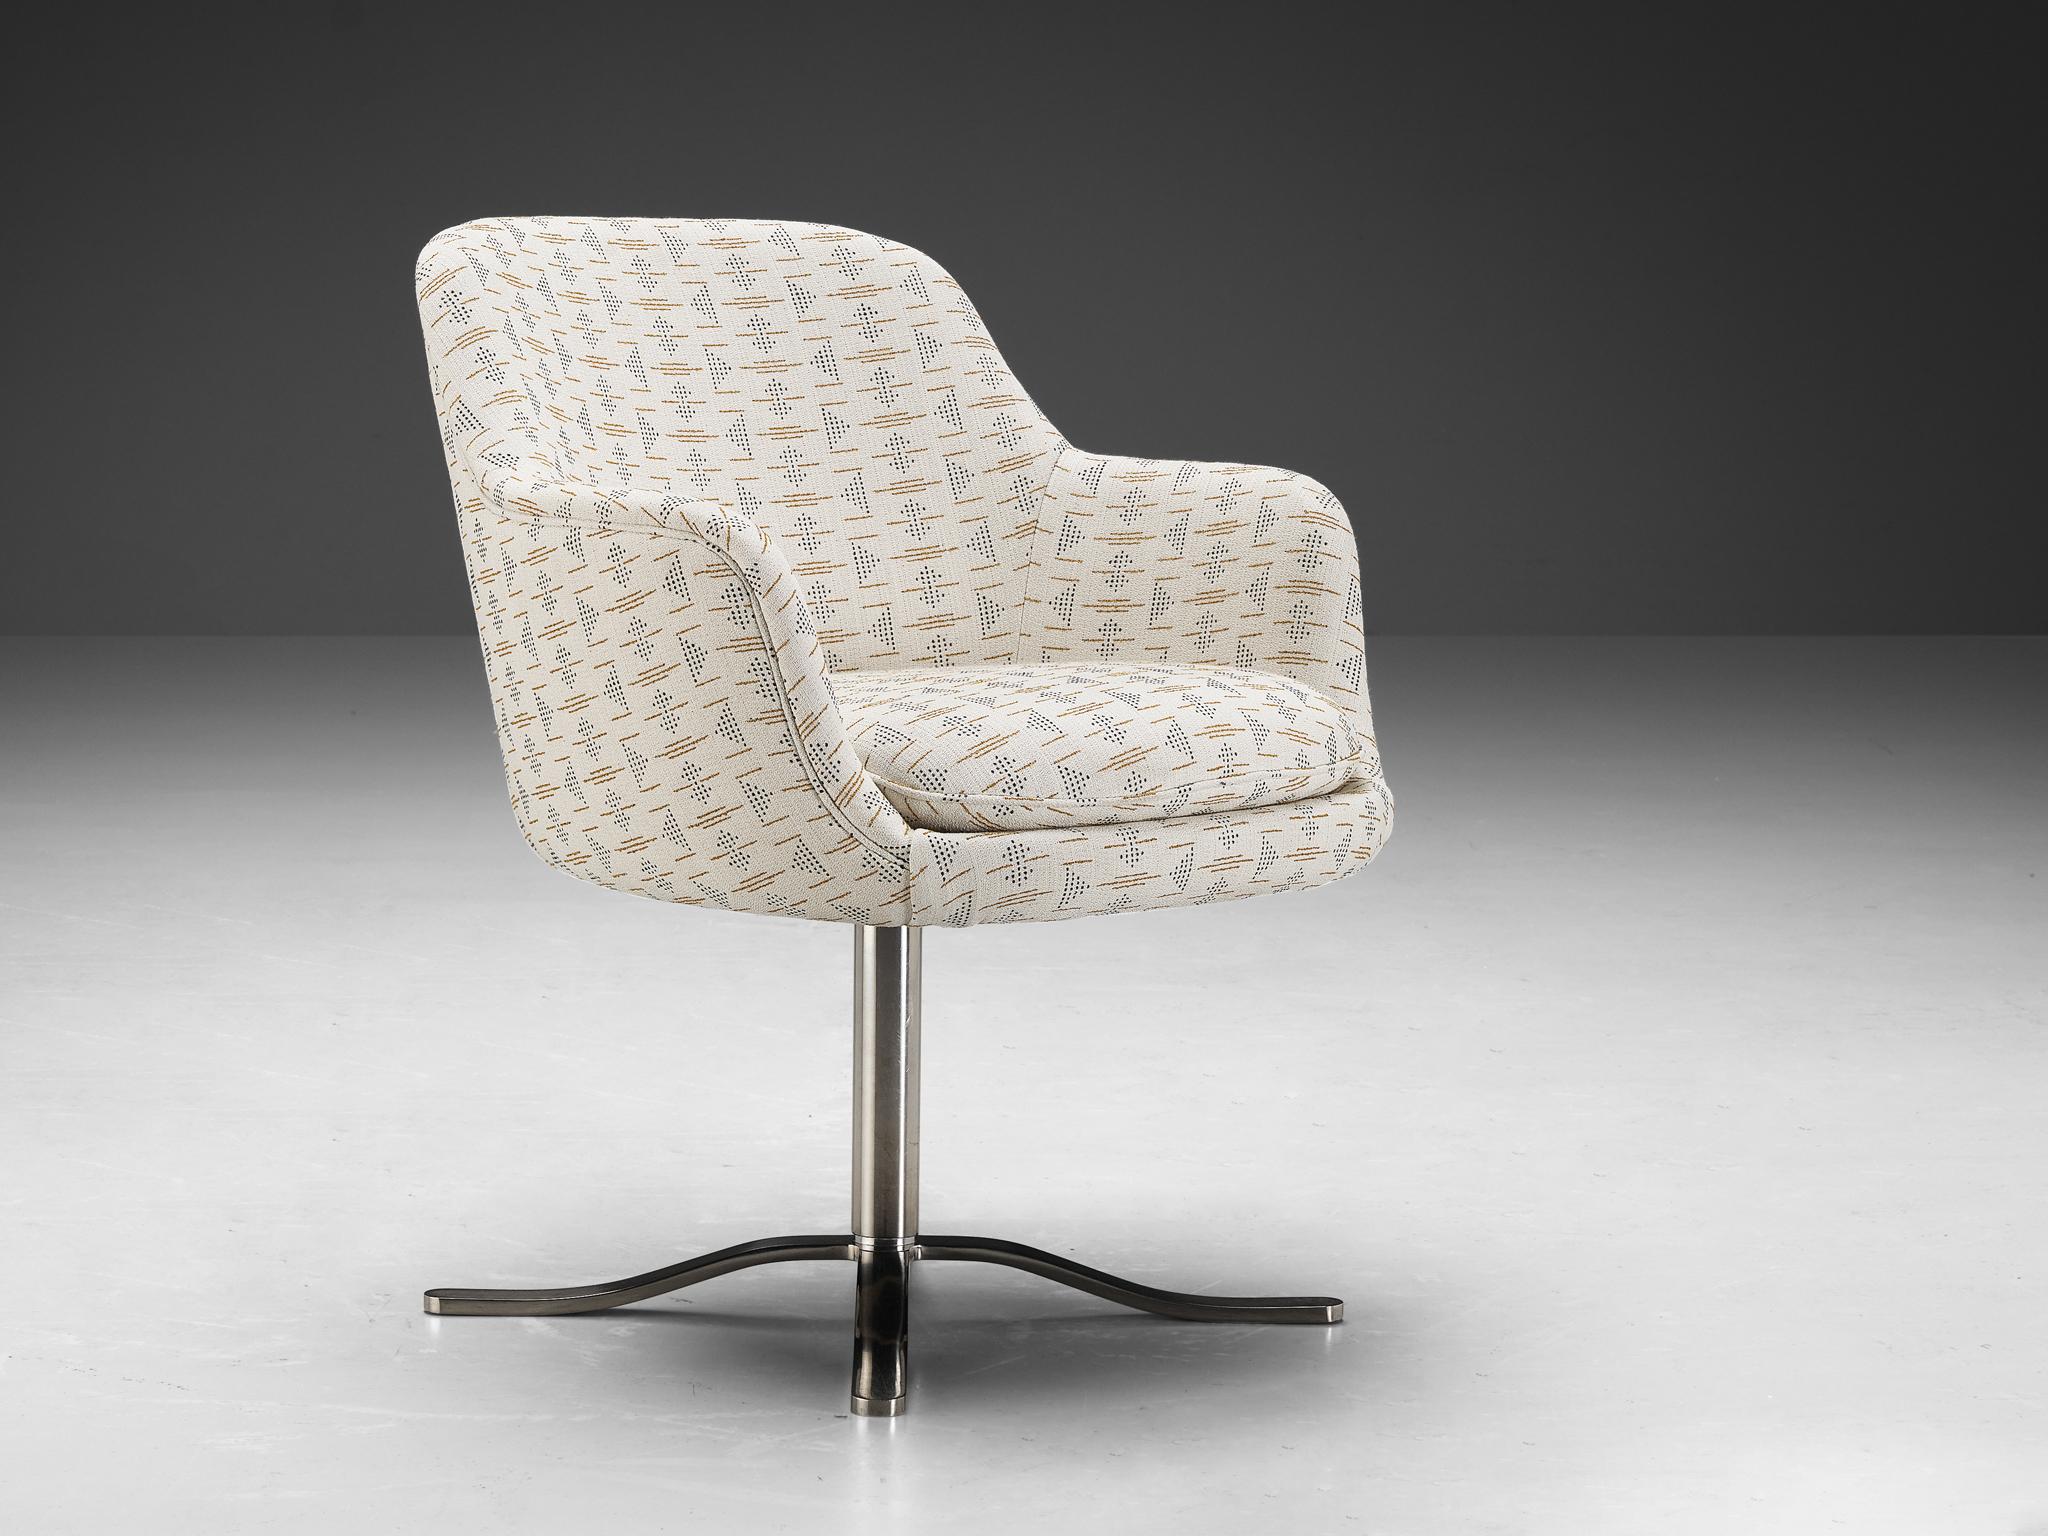 Mid-20th Century Nicos Zographos 'Bucket' Dining Chair in Patterned Upholstery 